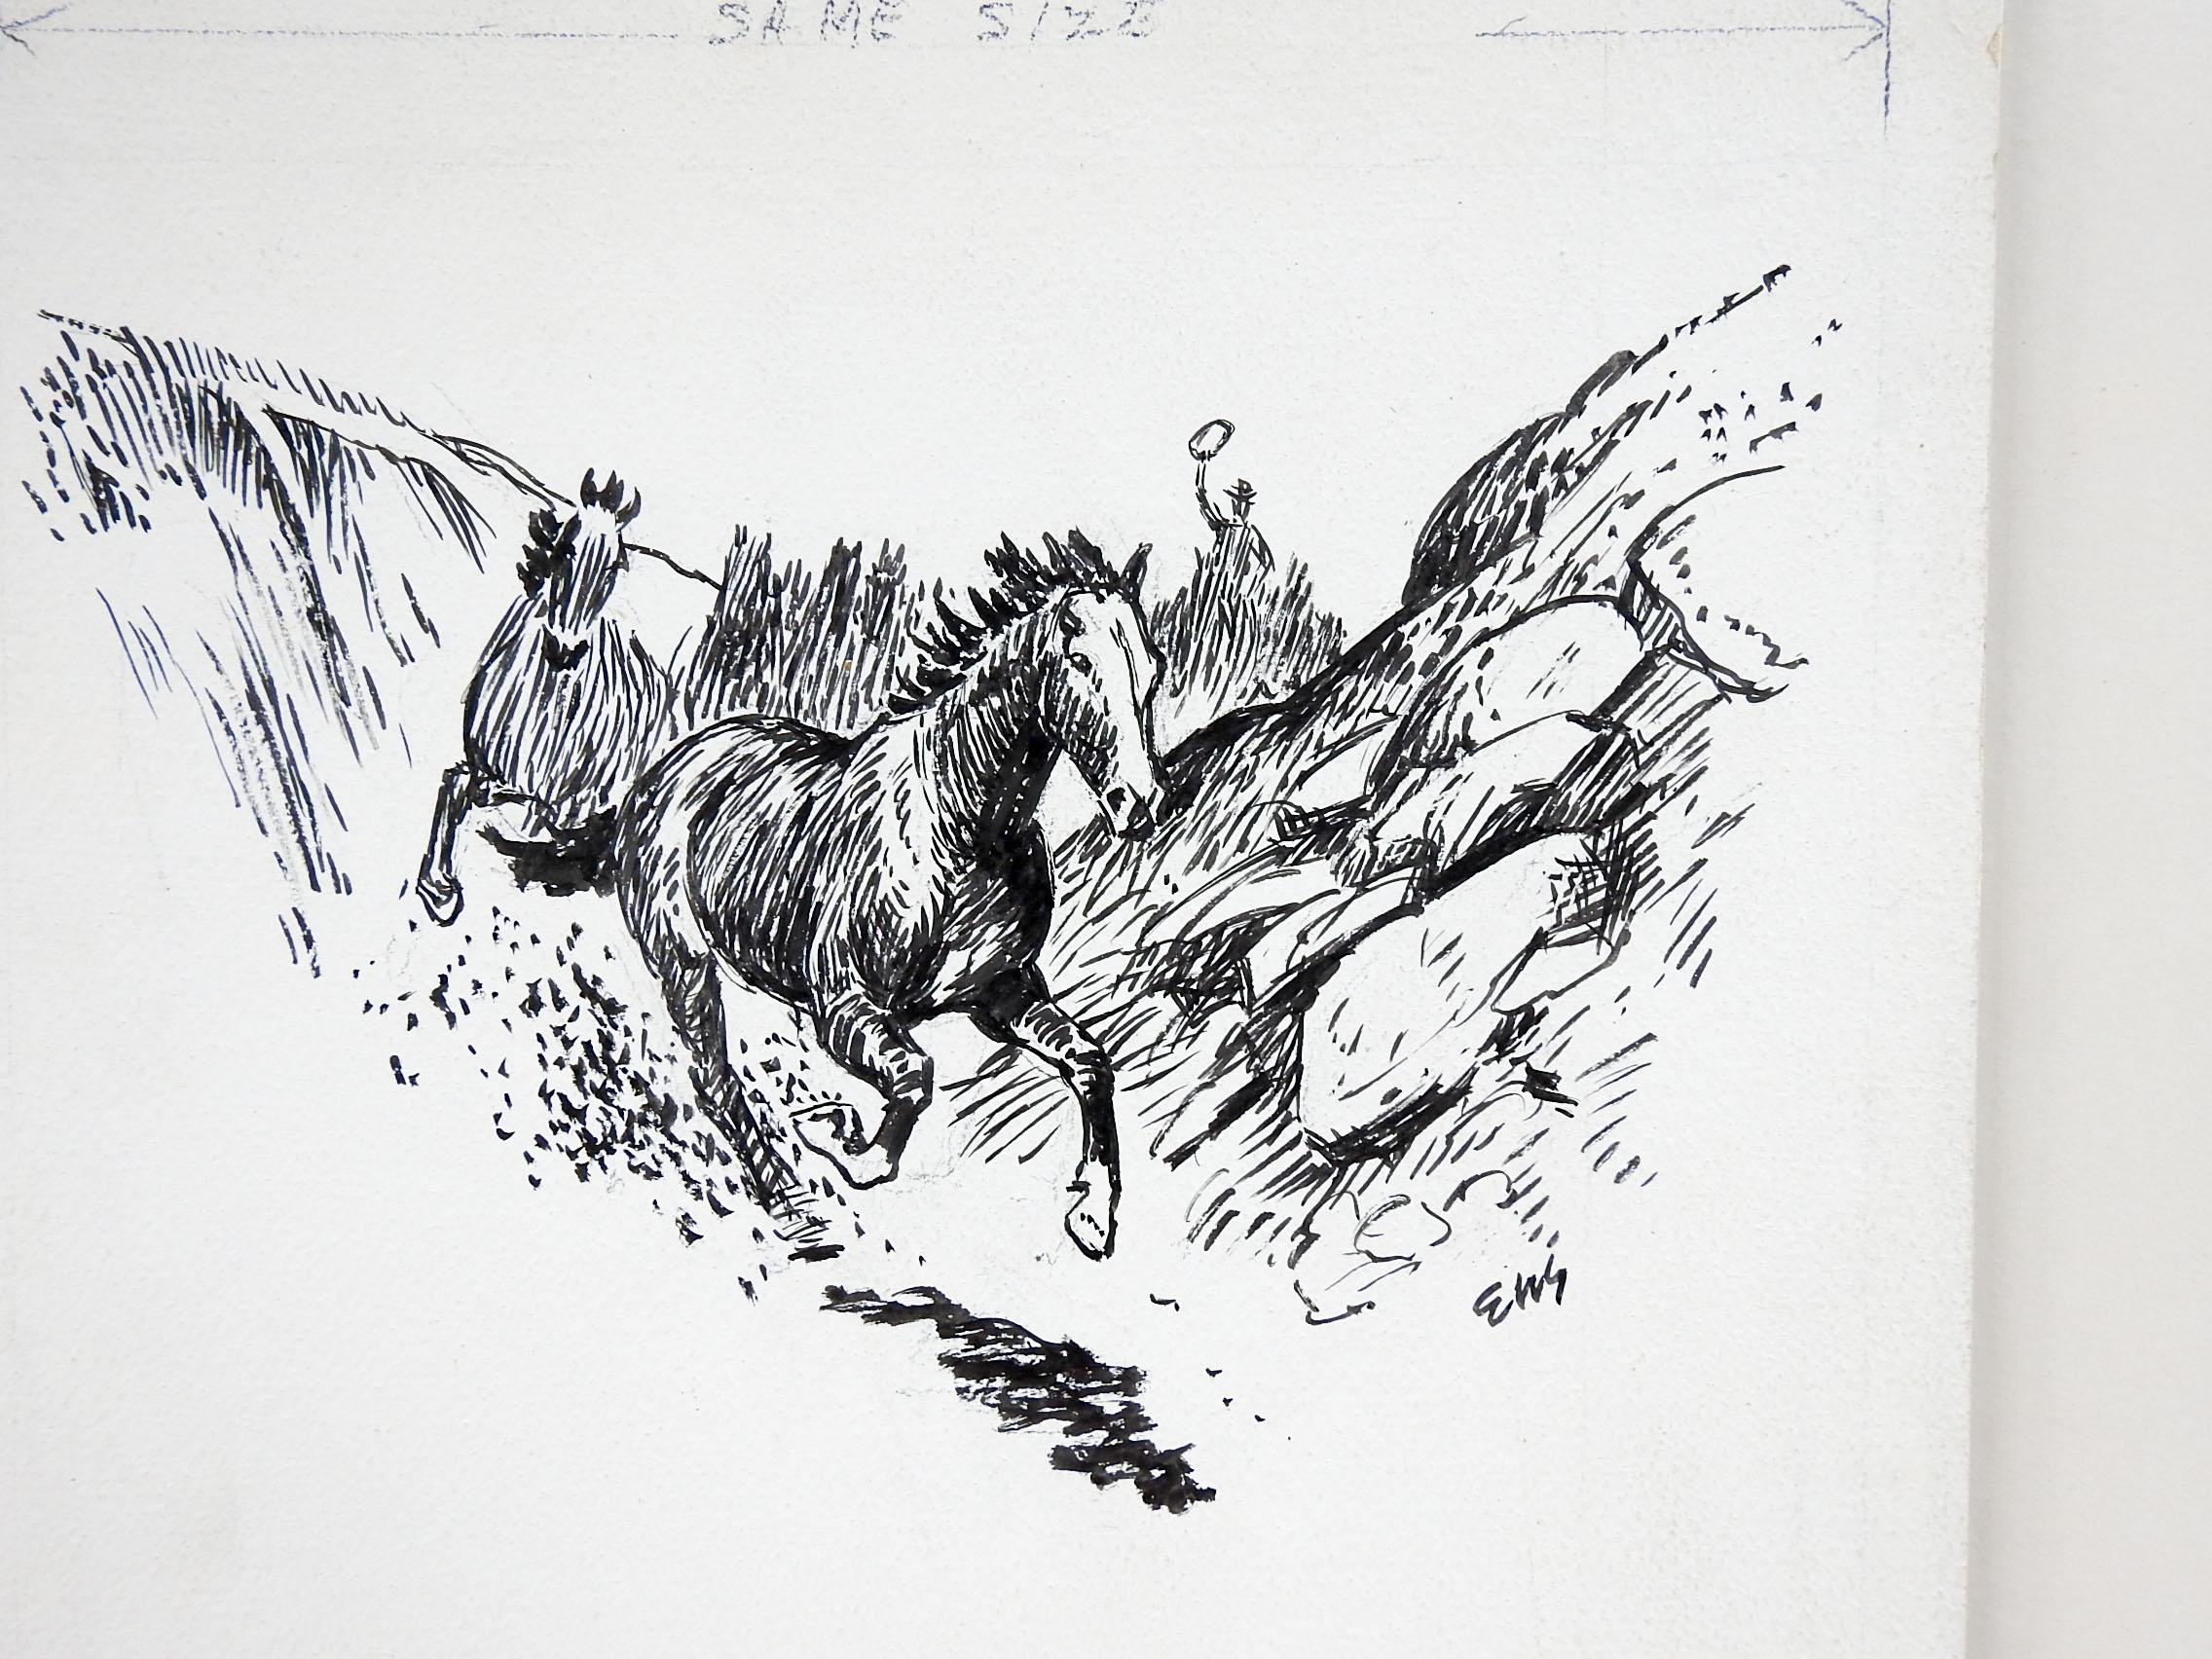 Pen and ink on artist board of wild horses by Eugene Shortridge (1926-2014) well know western illustration artist. Signed lower right corner. Unframed, edge wear.